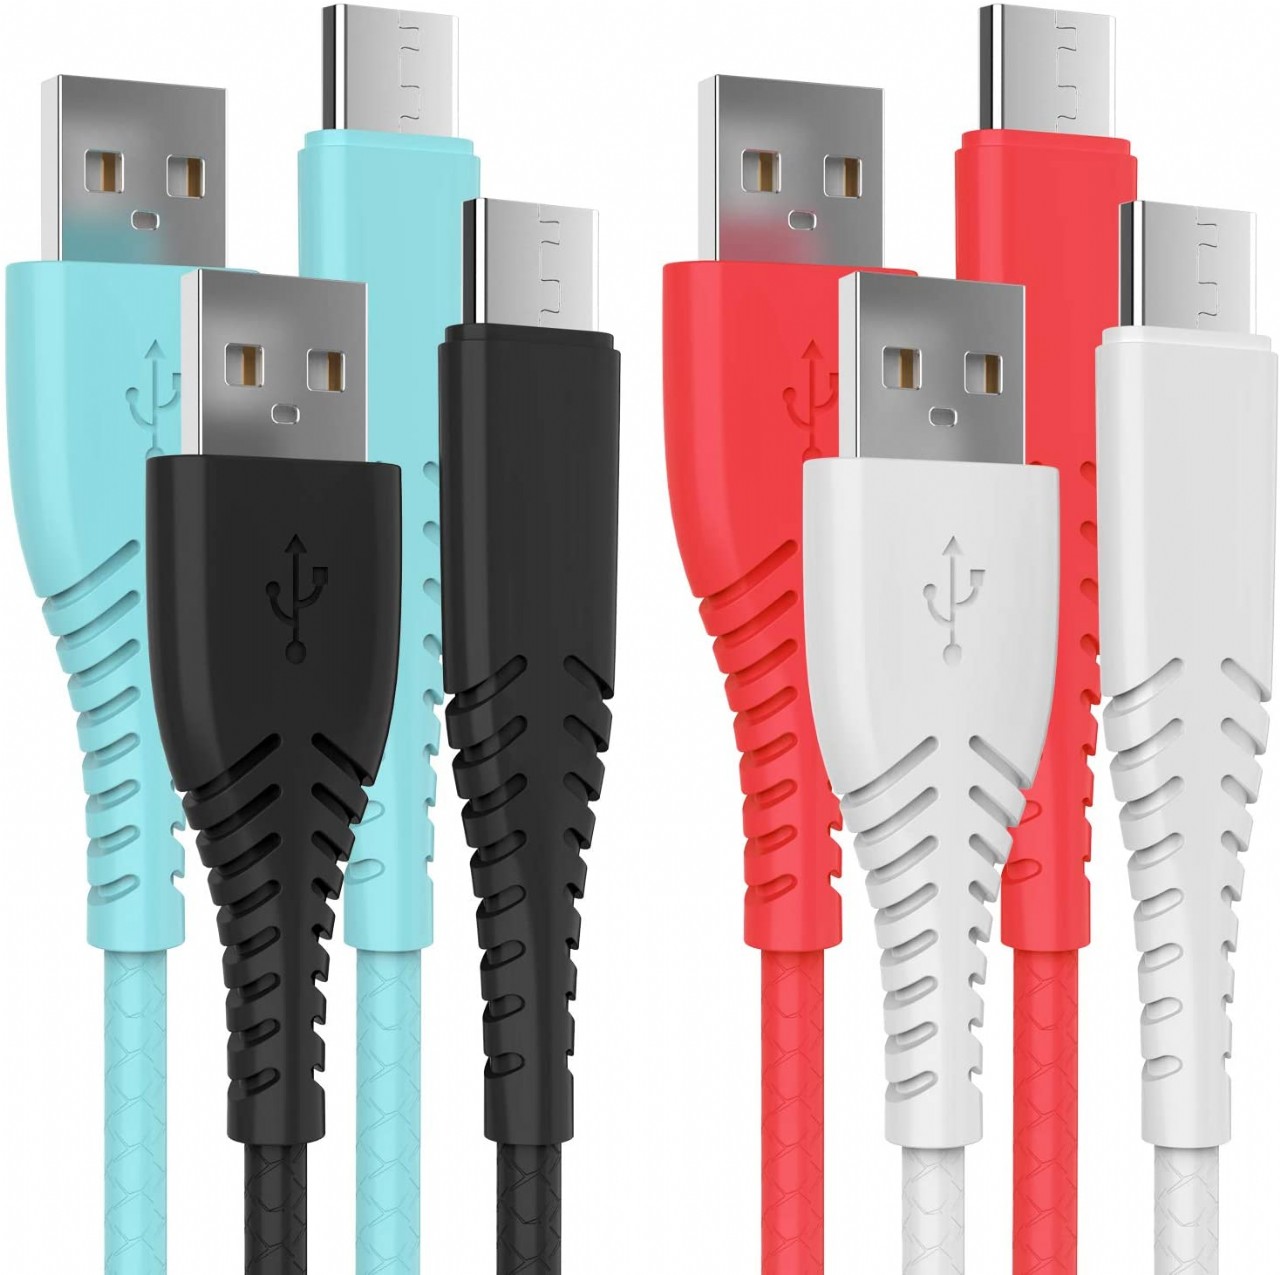 Cell Phone Micro USB Cable, Cell Phone Charging Cable USB 2.0 A Male to Micro B Sync Data Cable Cord